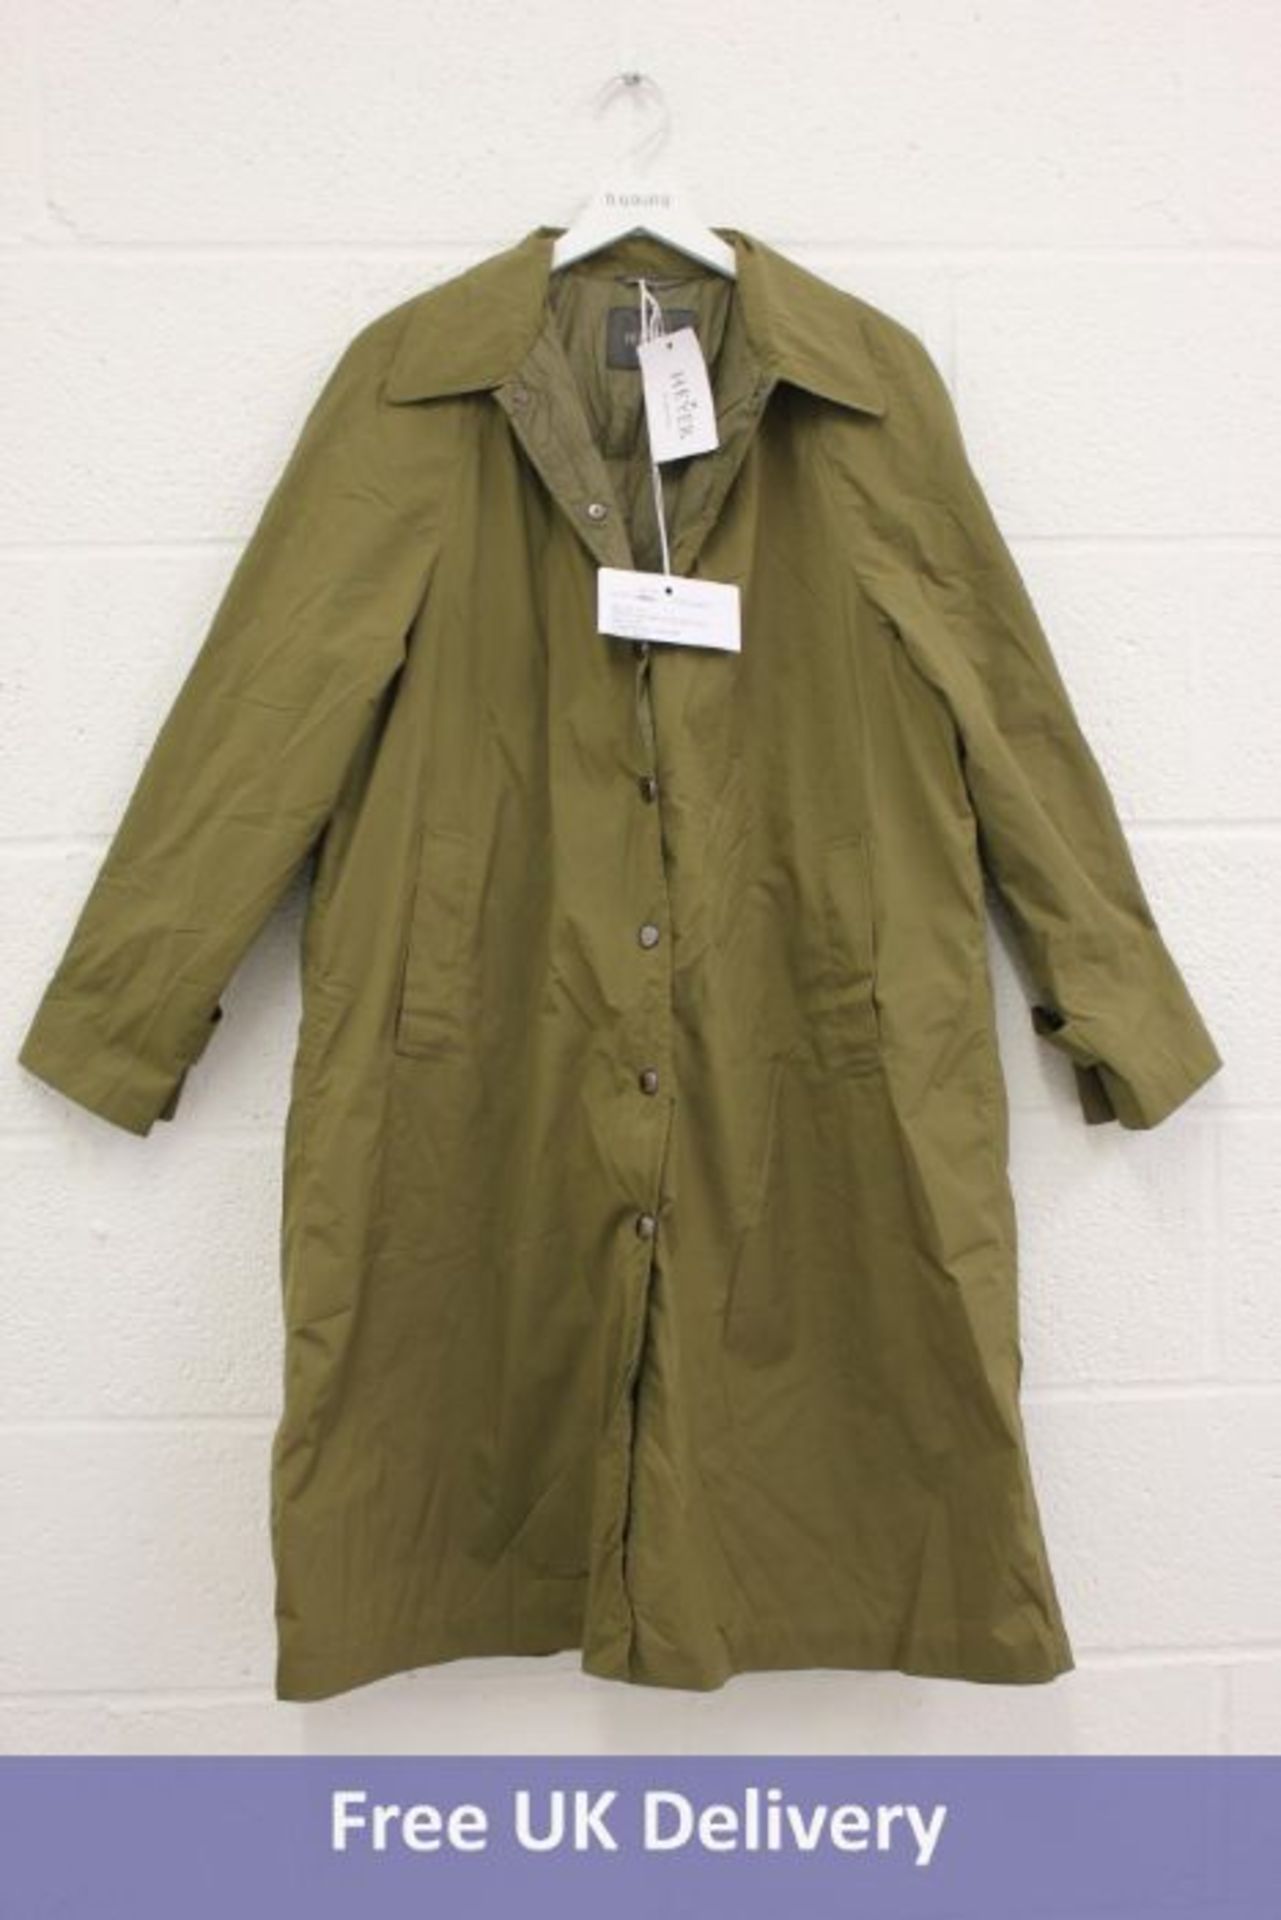 Three items of Heyer Women's Clothing to include 1x Elect Coat, Green Size 34-50, 1x Elect Long Coat